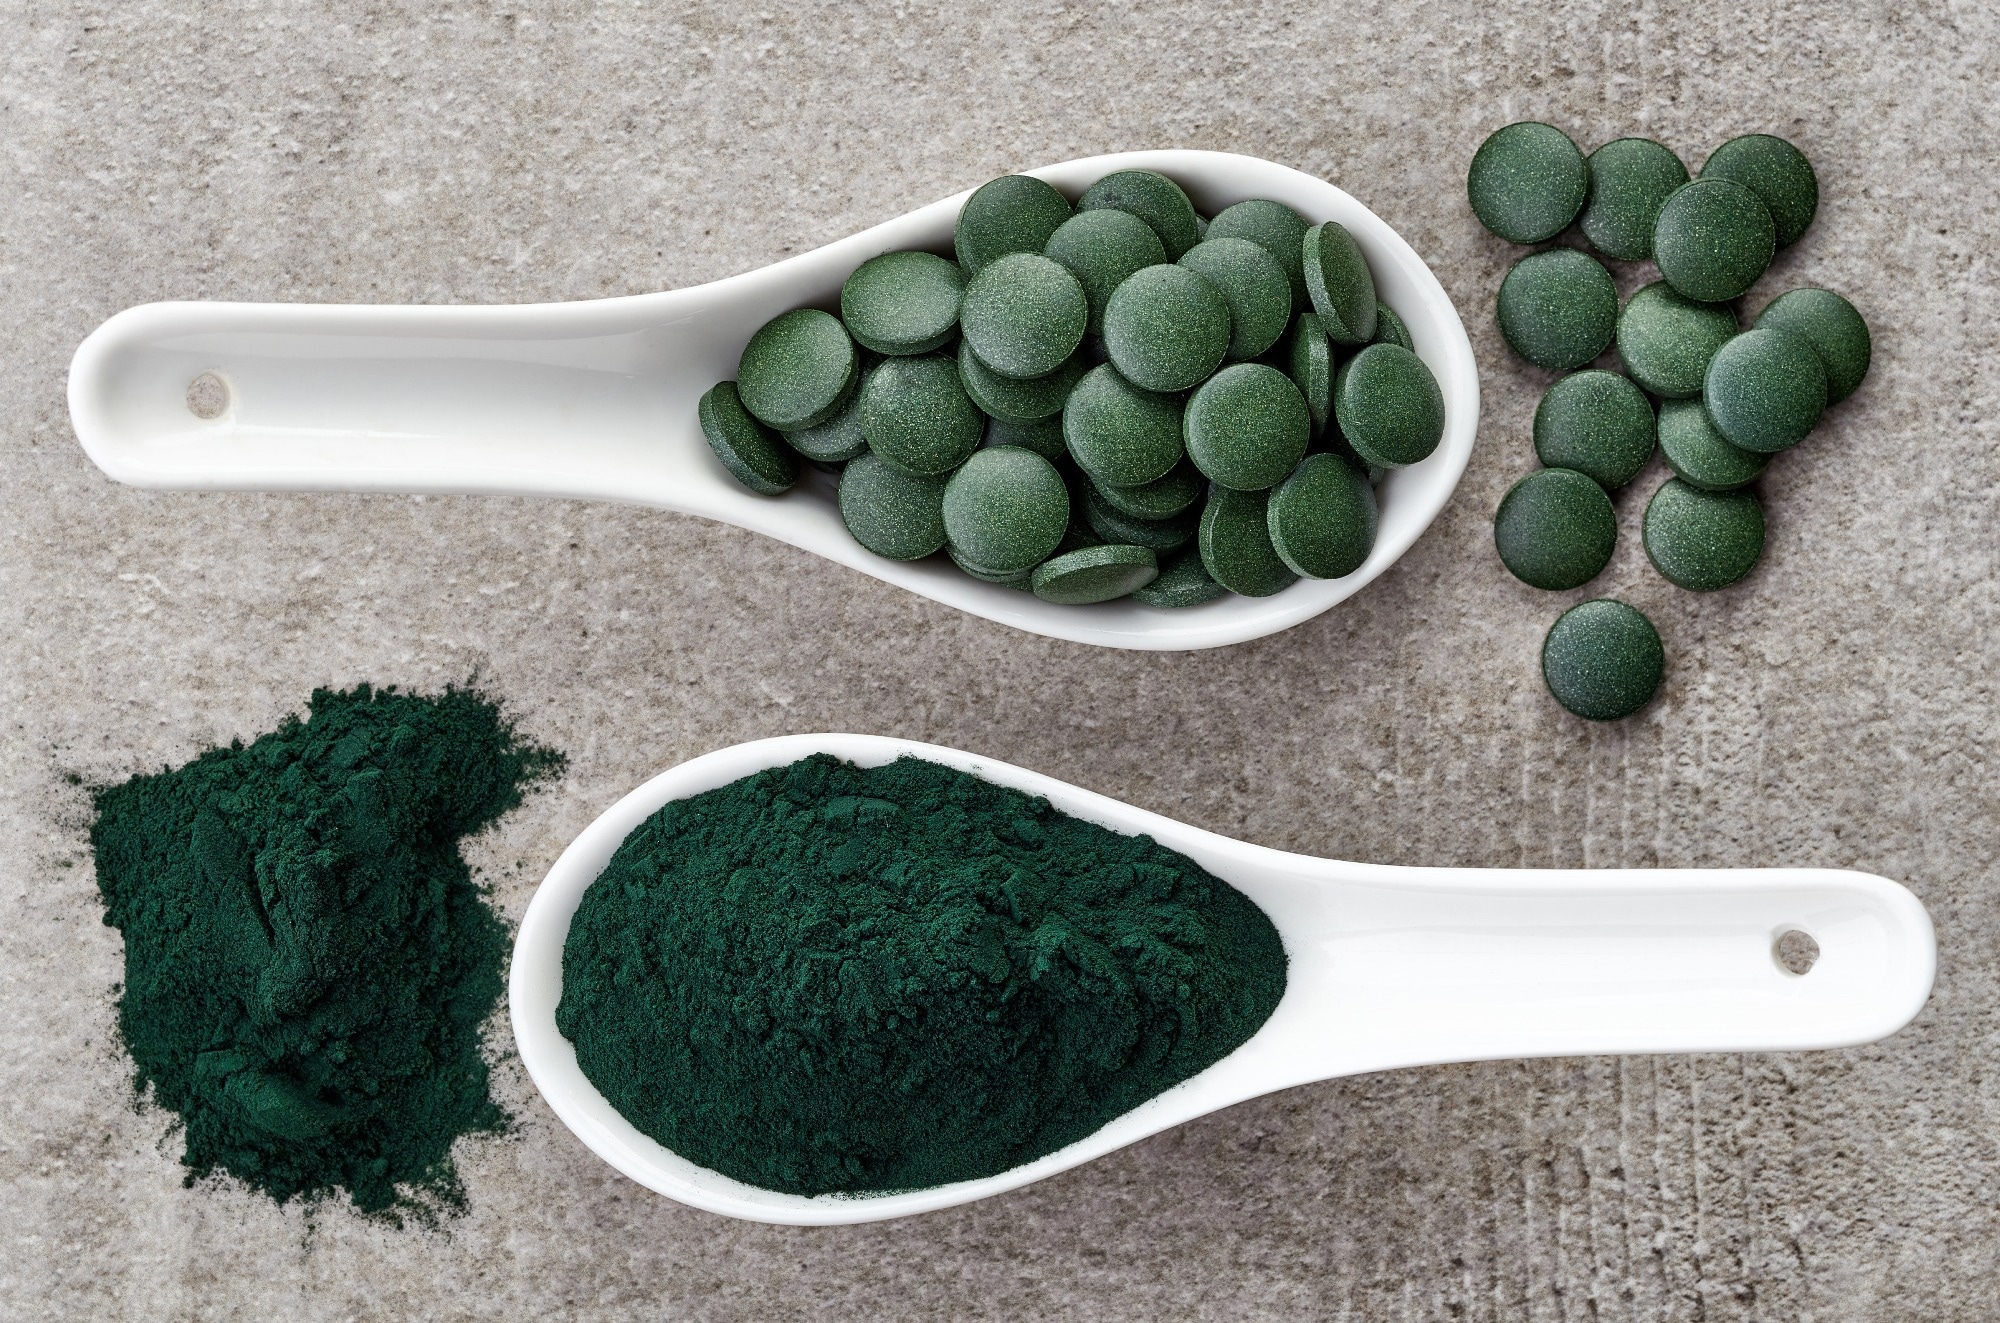 Study: Beneficial Effects of Spirulina Supplementation in the Management of Cardiovascular Diseases. Image Credit: baibaz / Shutterstock